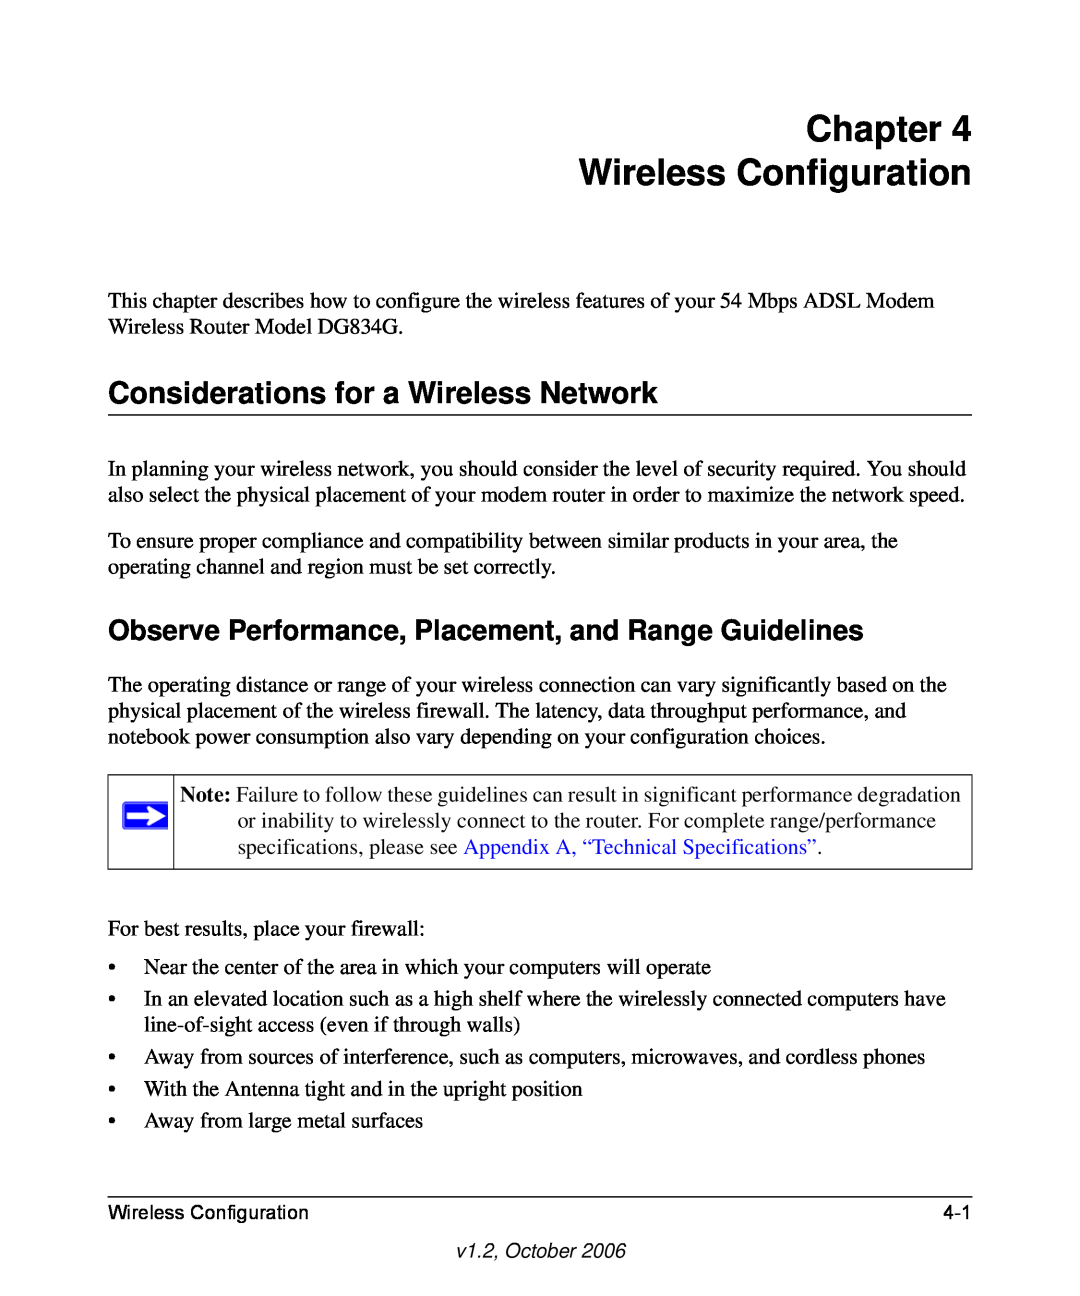 NETGEAR DG834G manual Chapter Wireless Configuration, Considerations for a Wireless Network 